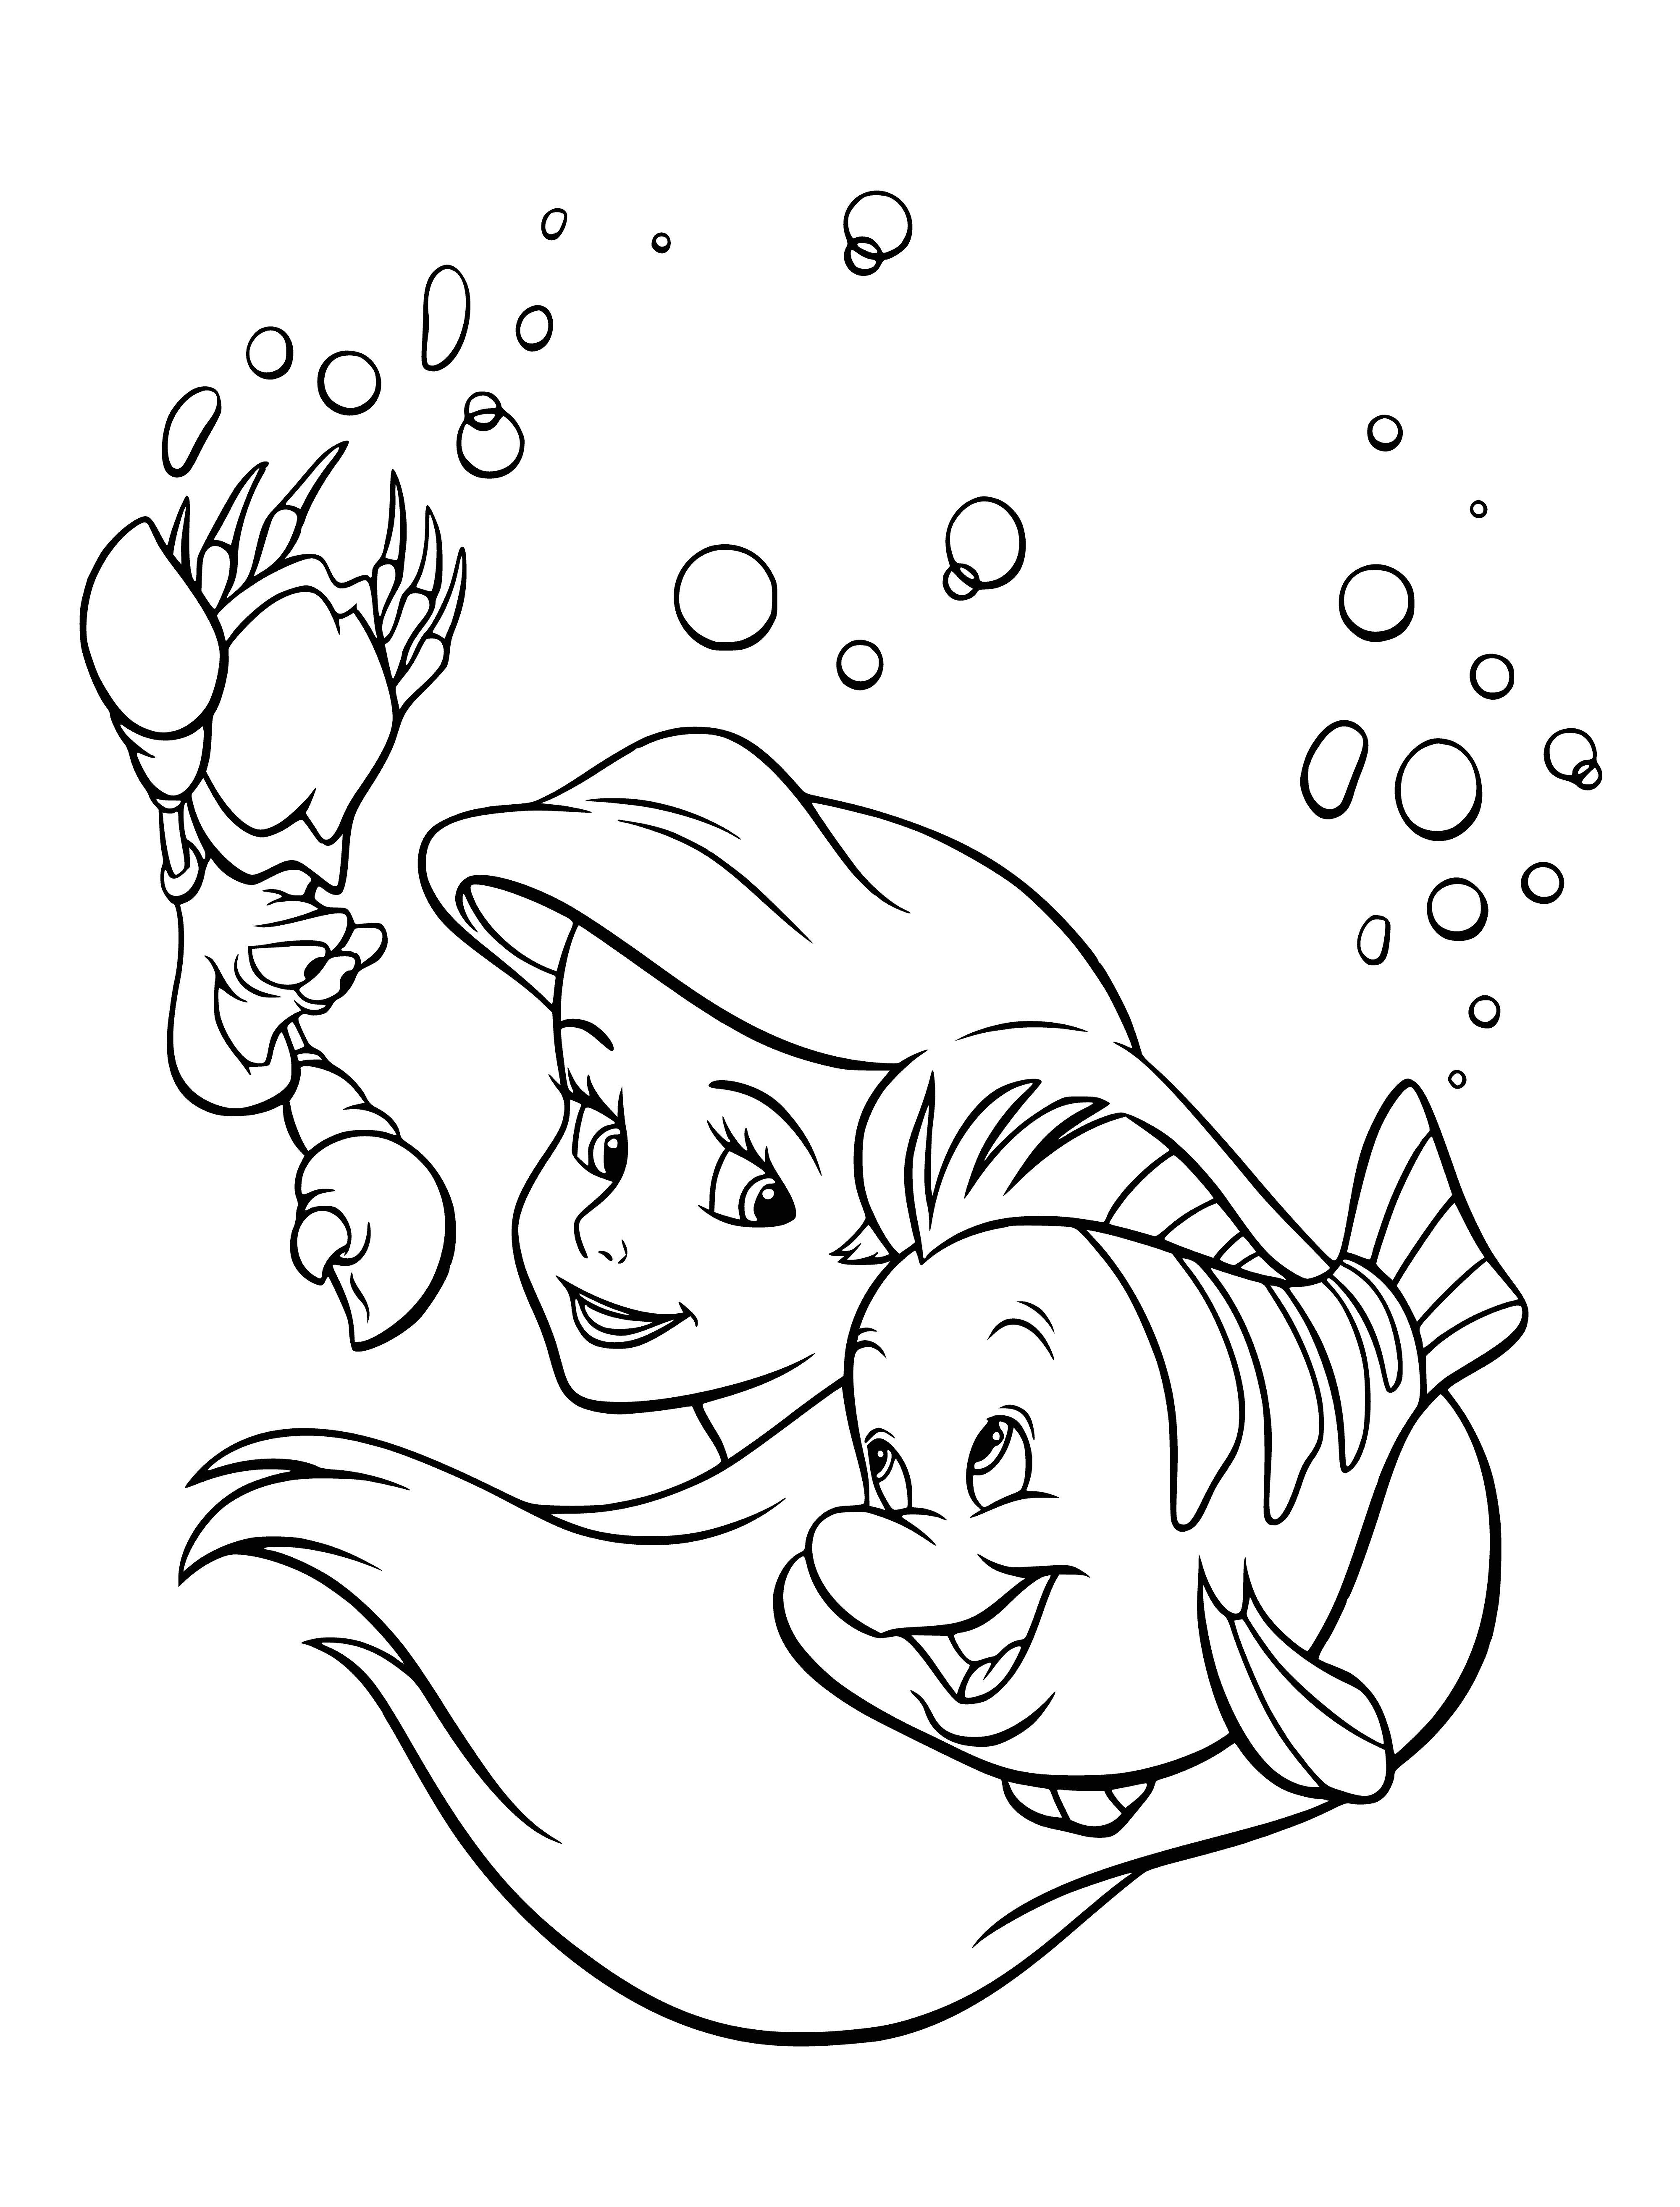 coloring page: Ariel, a mermaid with pink seashell top and a purple fishtail, frolicking happily with friends Flounder and Sebastian under the sea in a magical kingdom.